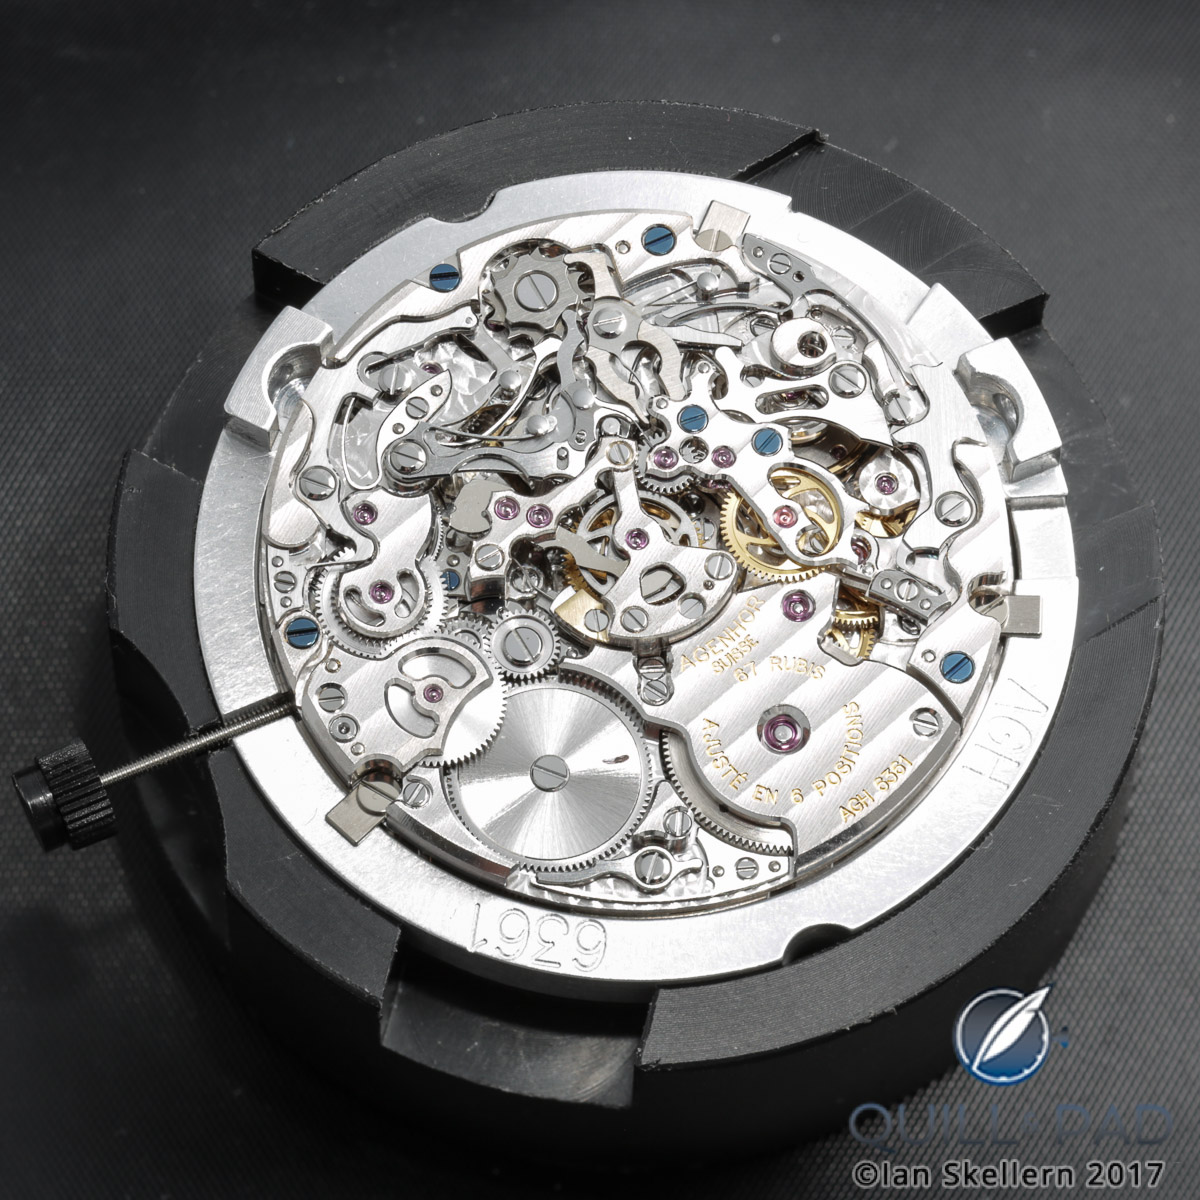 AgenGraphe automatic chronograph movement by Agenhor